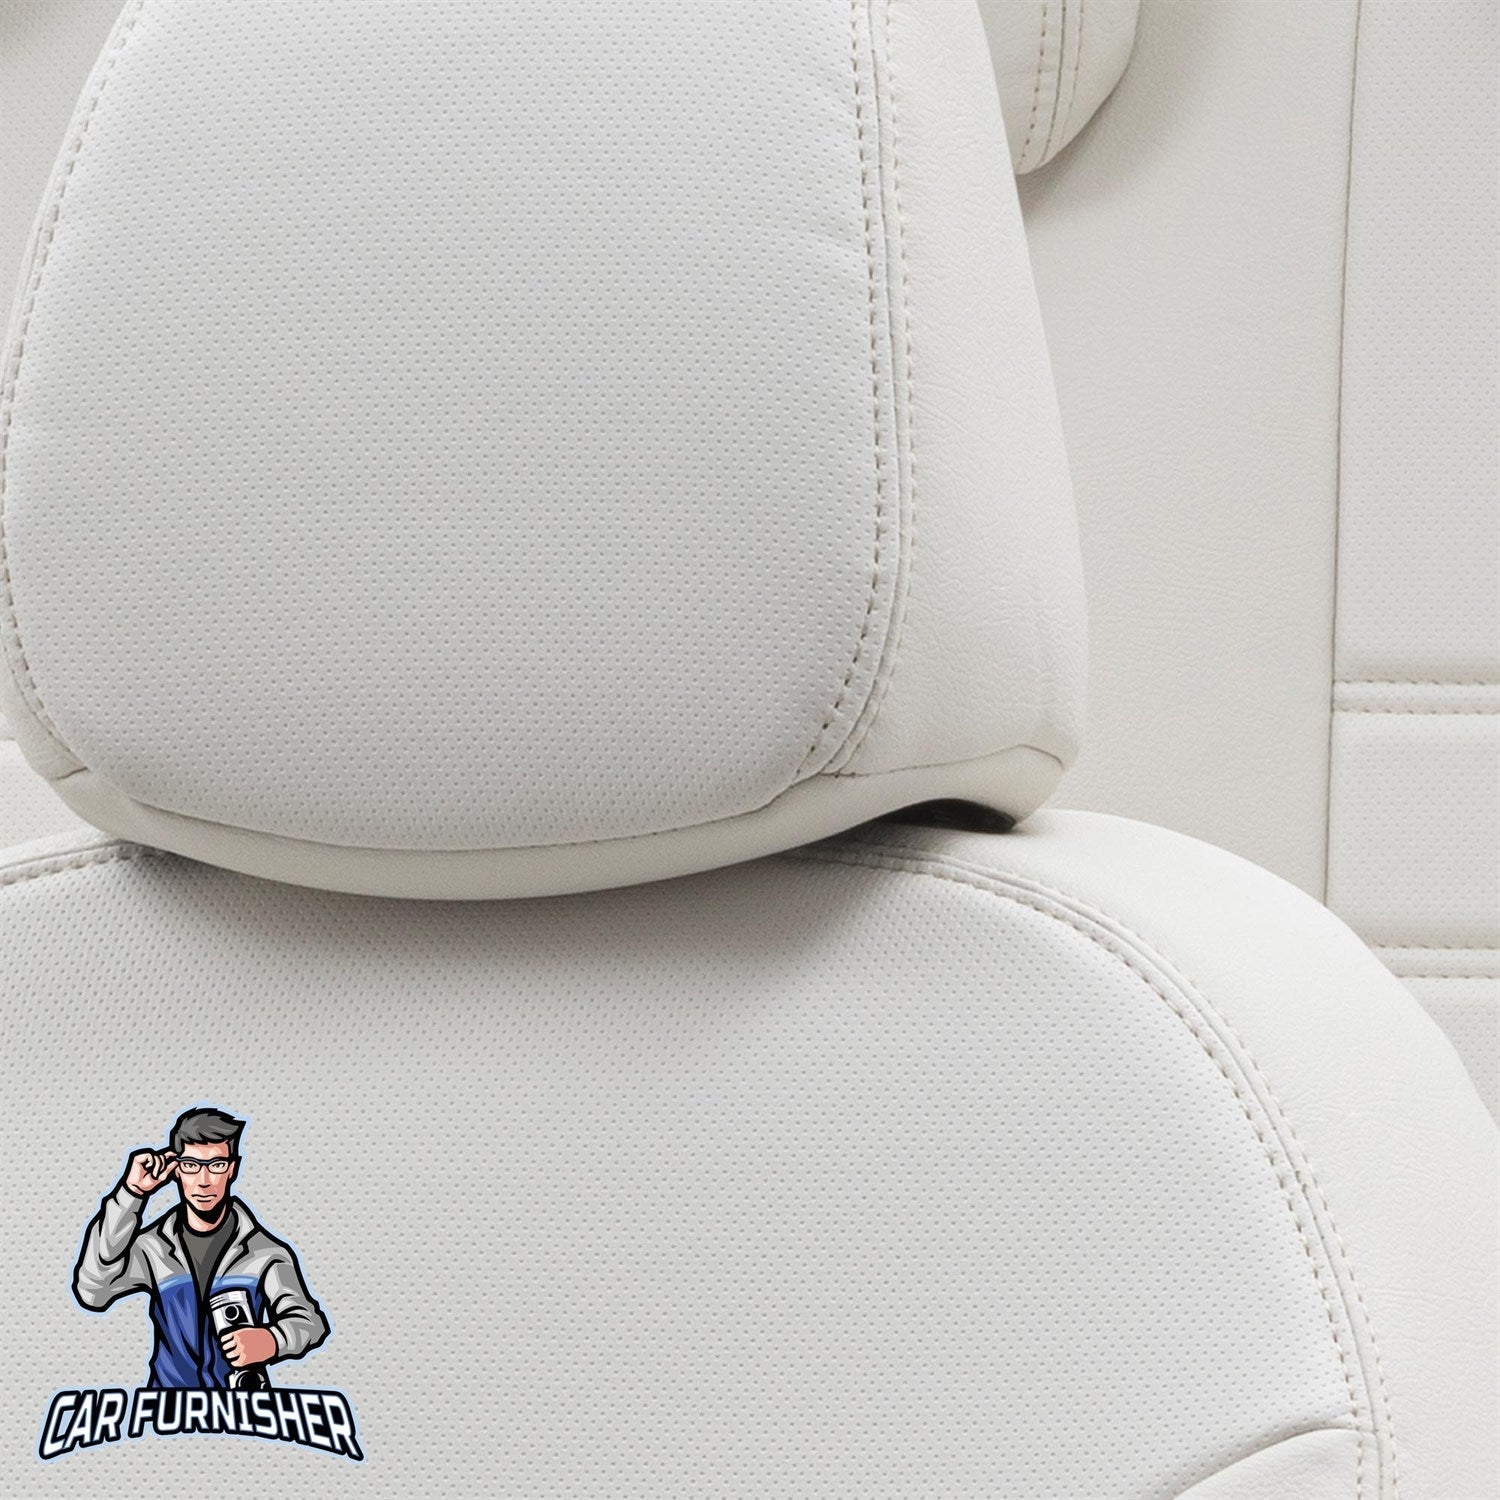 Audi A6 Seat Cover Istanbul Leather Design Ivory Leather